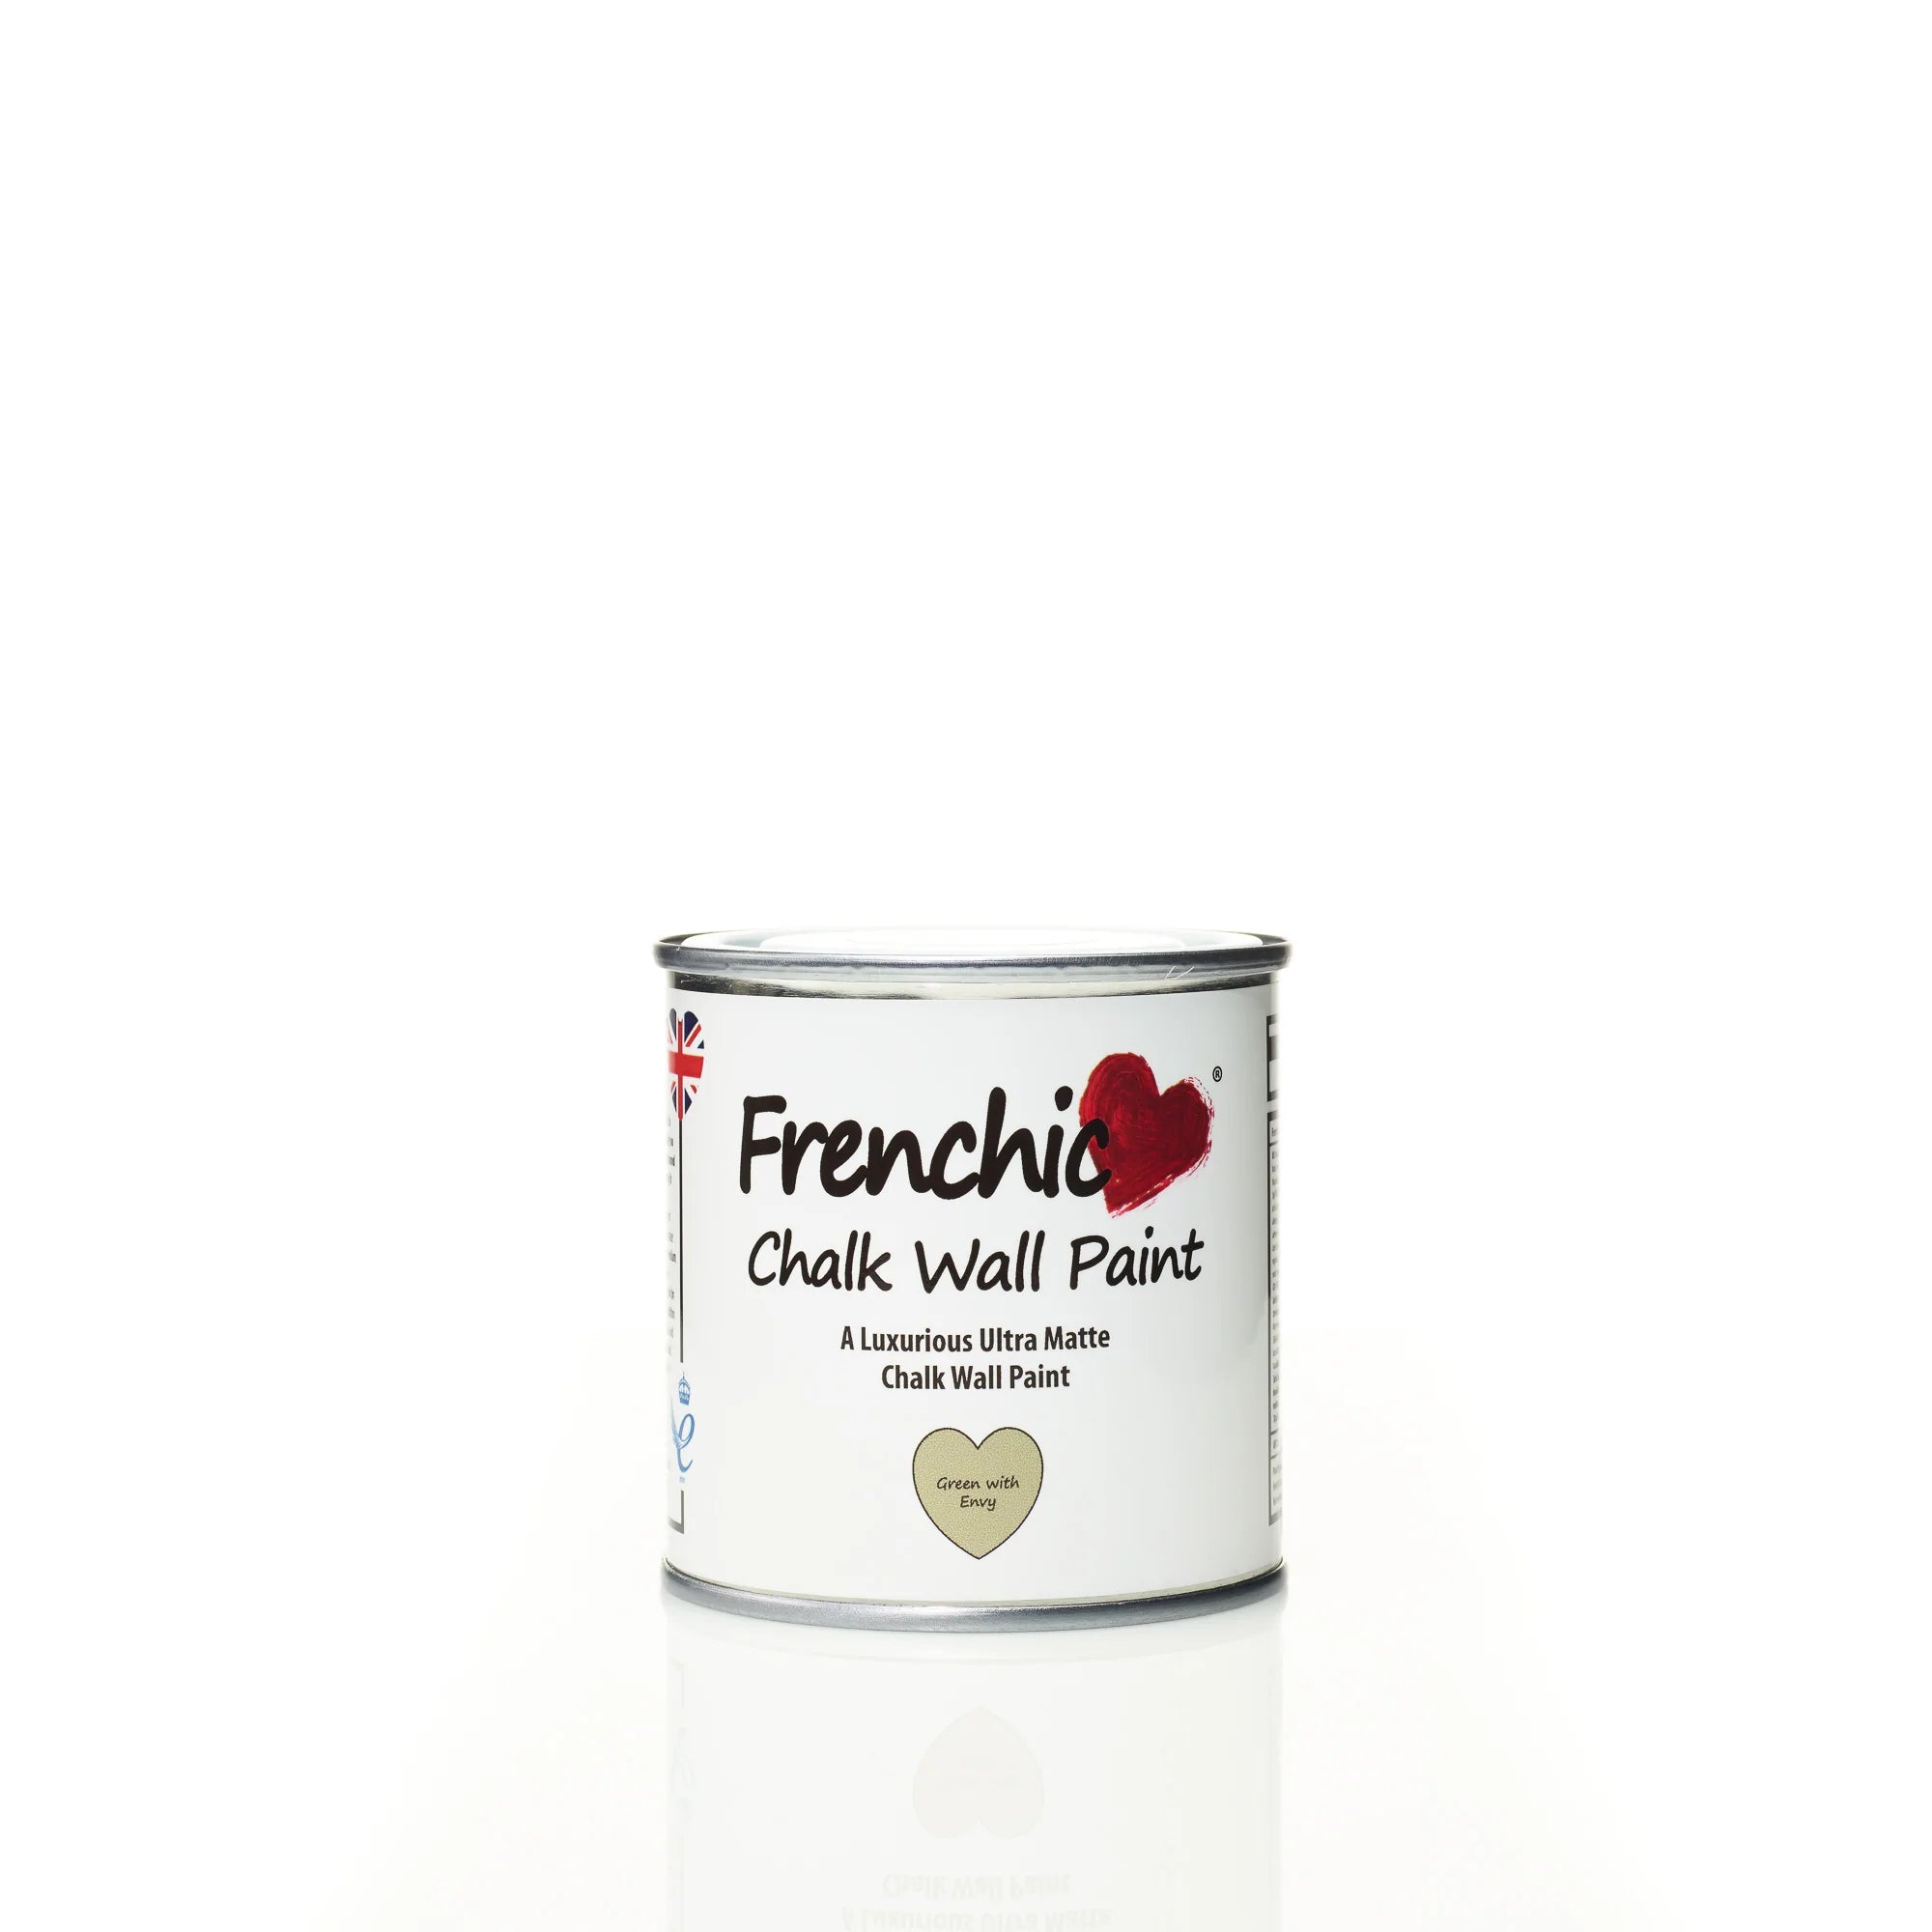 Frenchic Paint | Green with Envy Wall Paint by Weirs of Baggot St